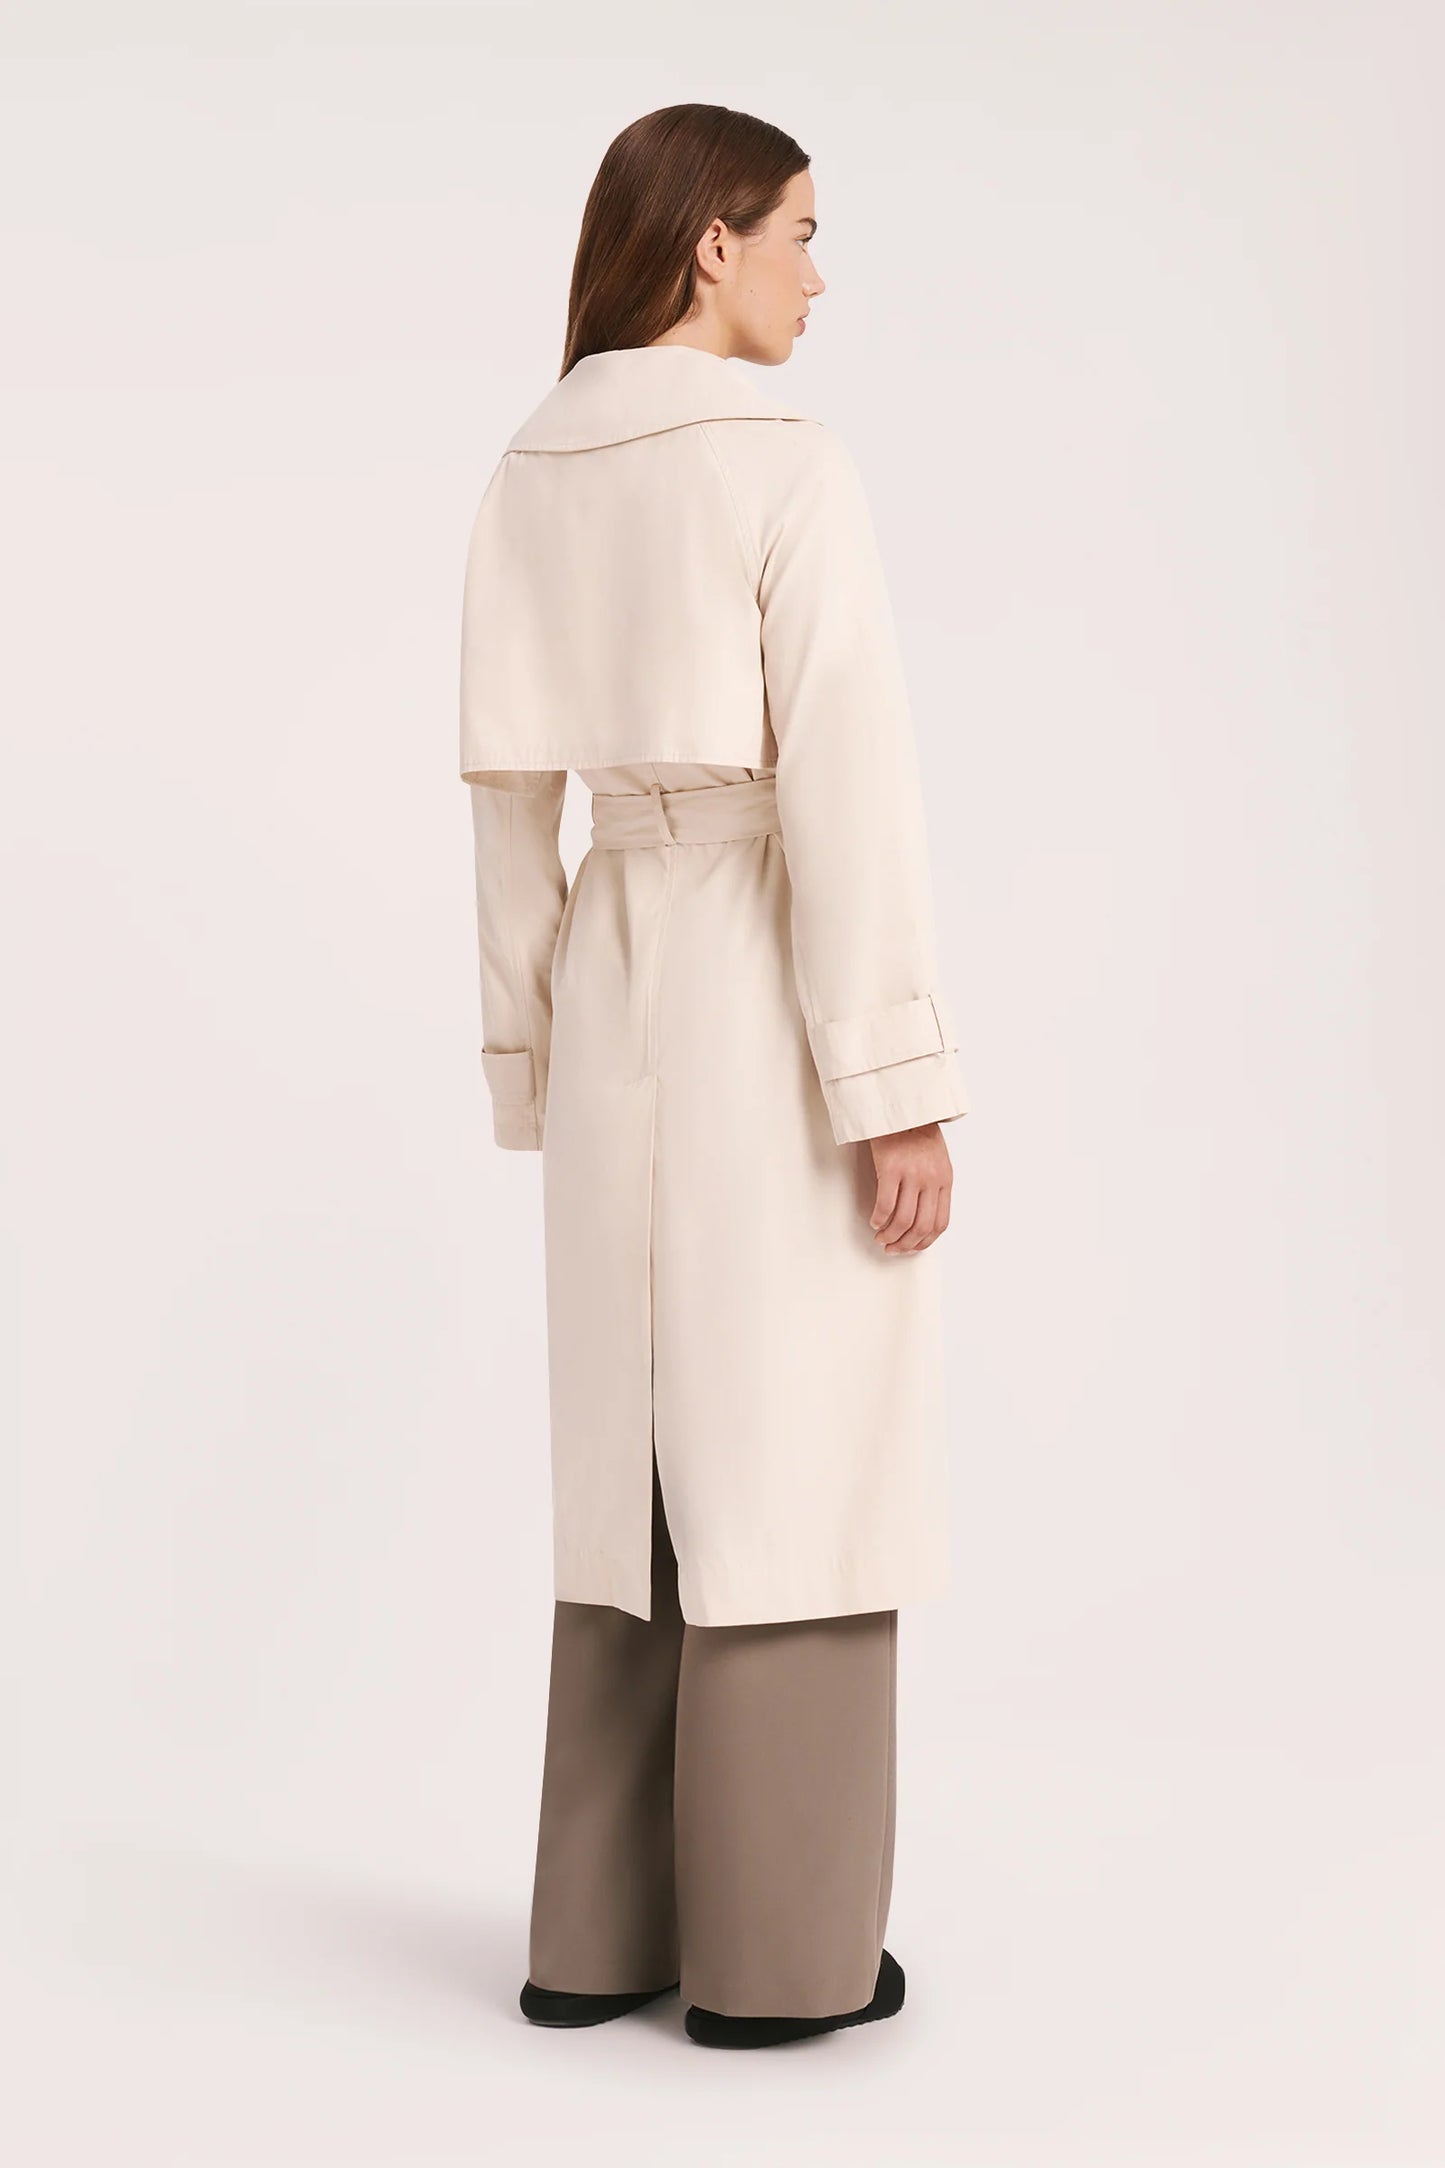 The Odyssey Trench coat is made from a sturdy cotton nylon blend with a peached/sueded finish. Fit is relaxed with wide full length sleeves &amp; body length finishing at knee level. Features include traditional trench coat detailing, double breasted button opening, waist tie &amp; storm flap.&nbsp;